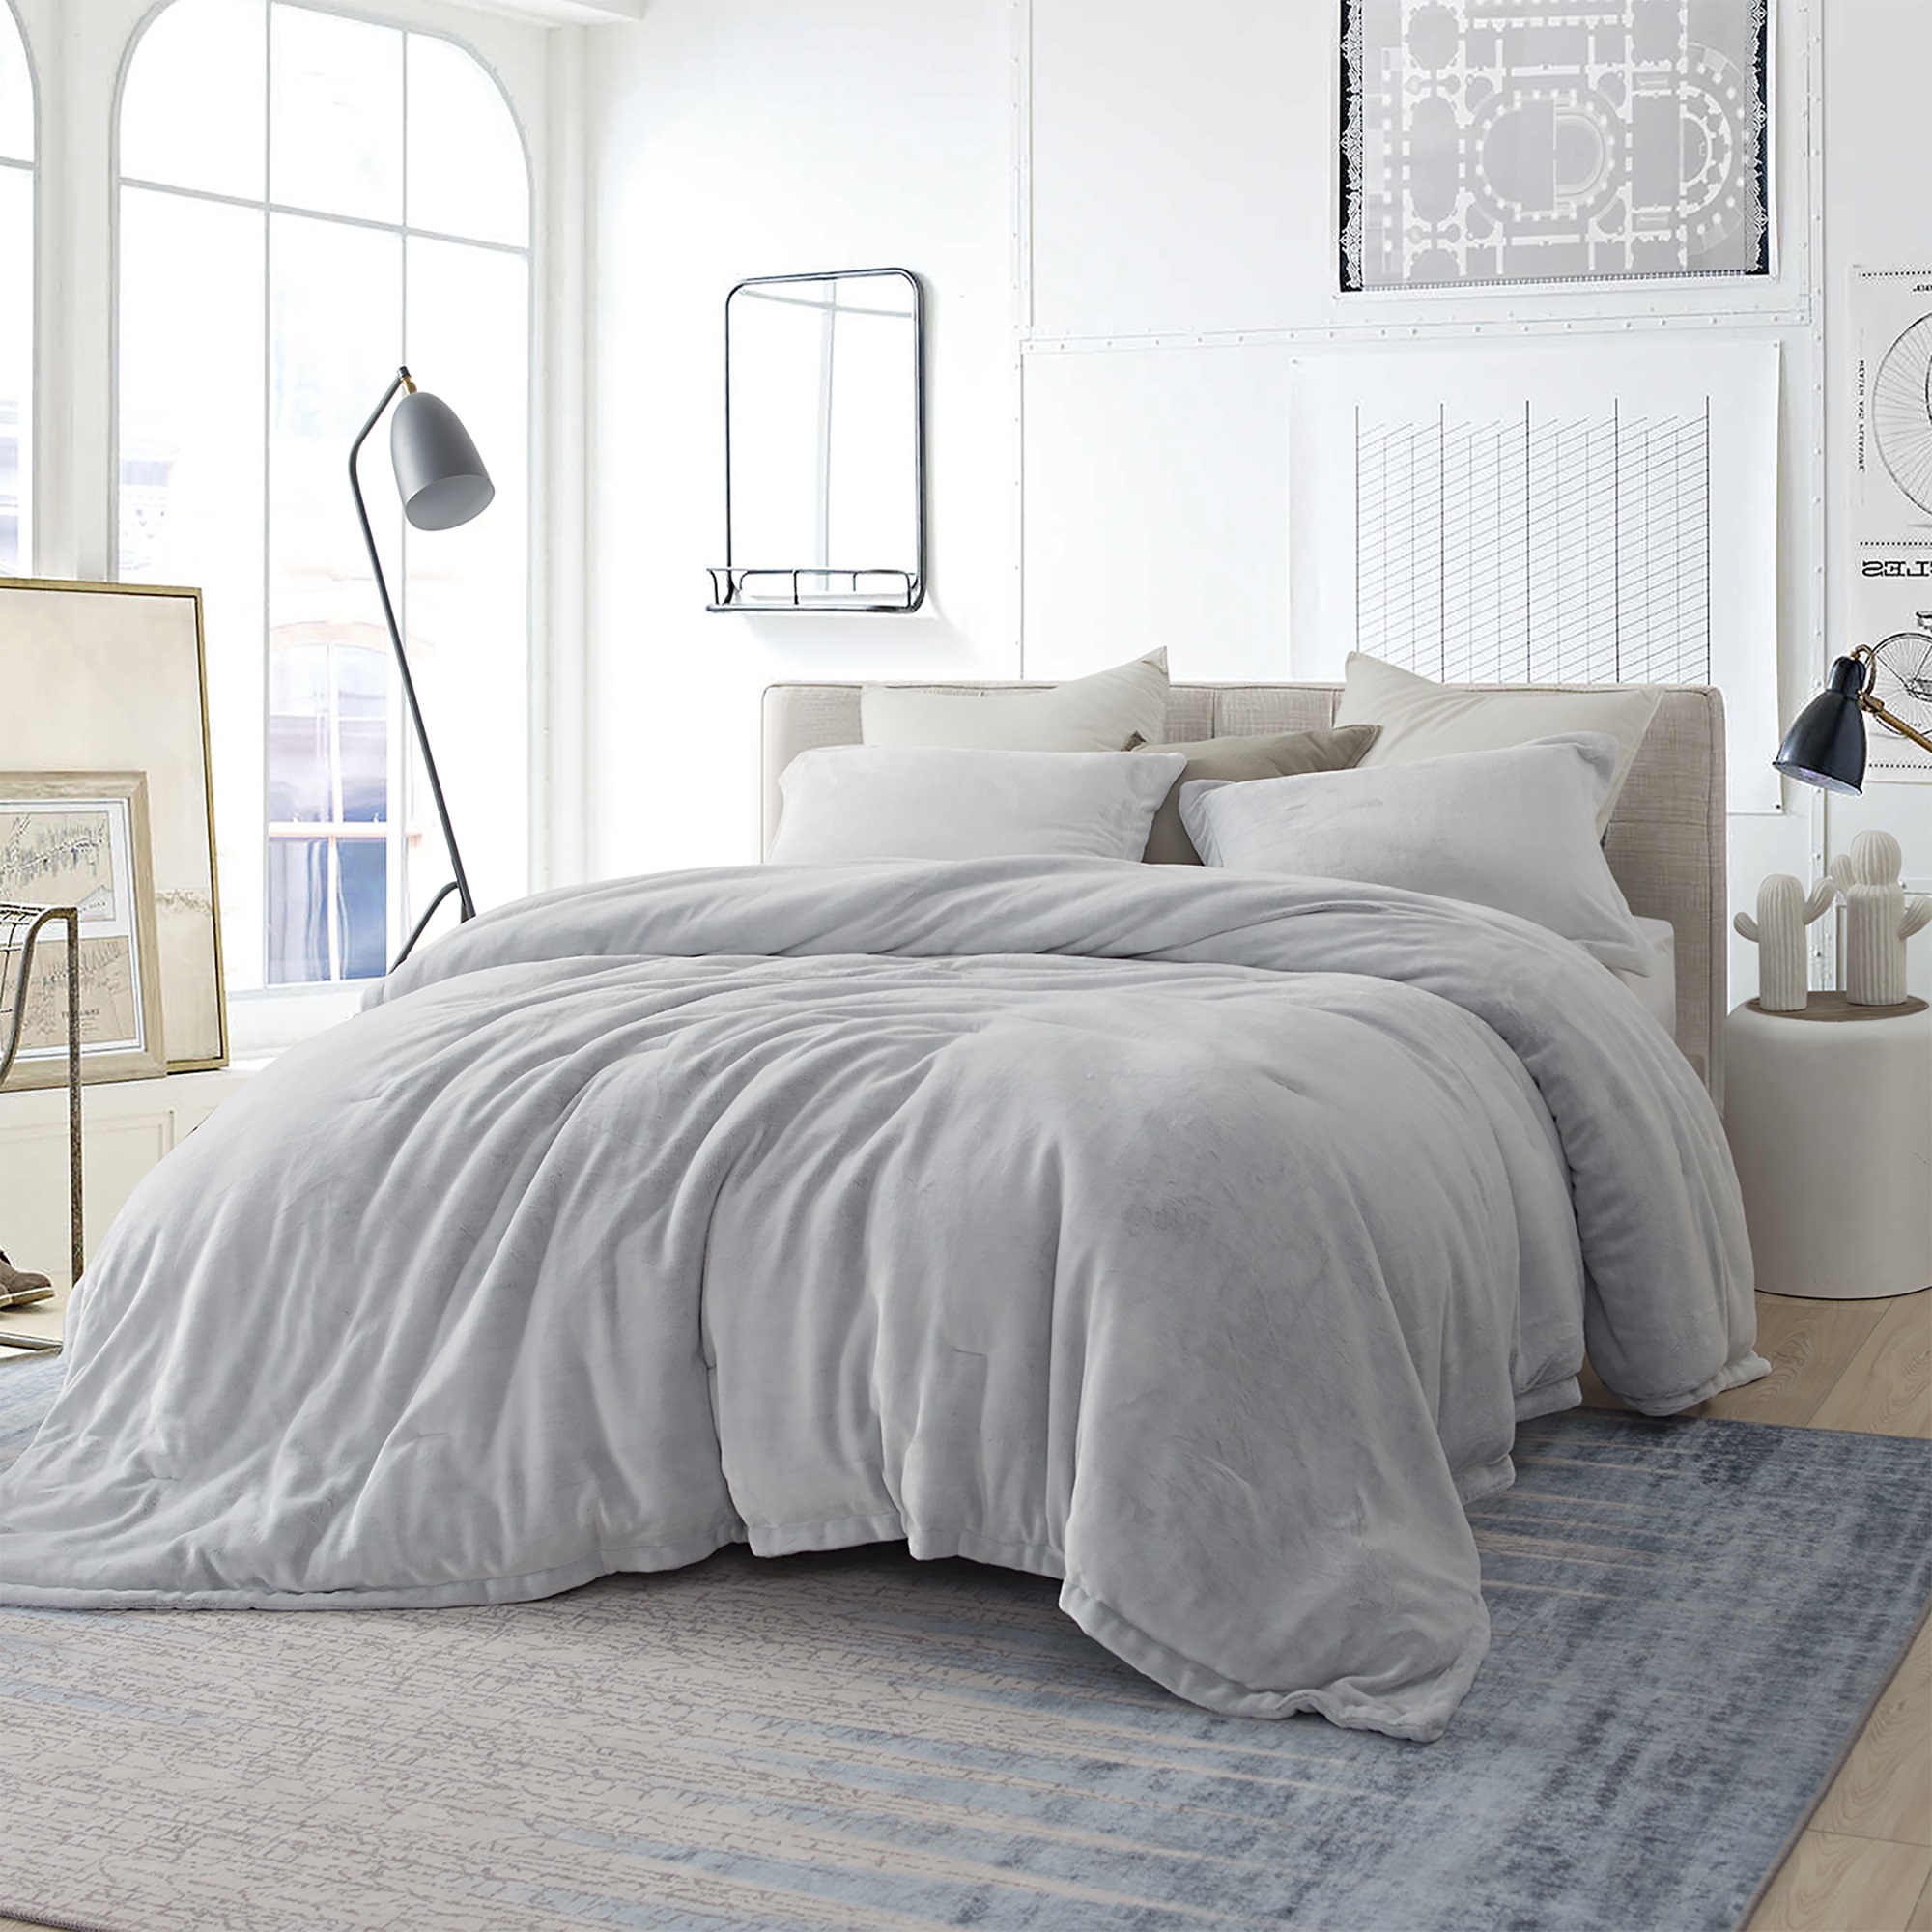 Coma Inducer?? Comforter - Oversized Bedding - Frosted - Granite Gray